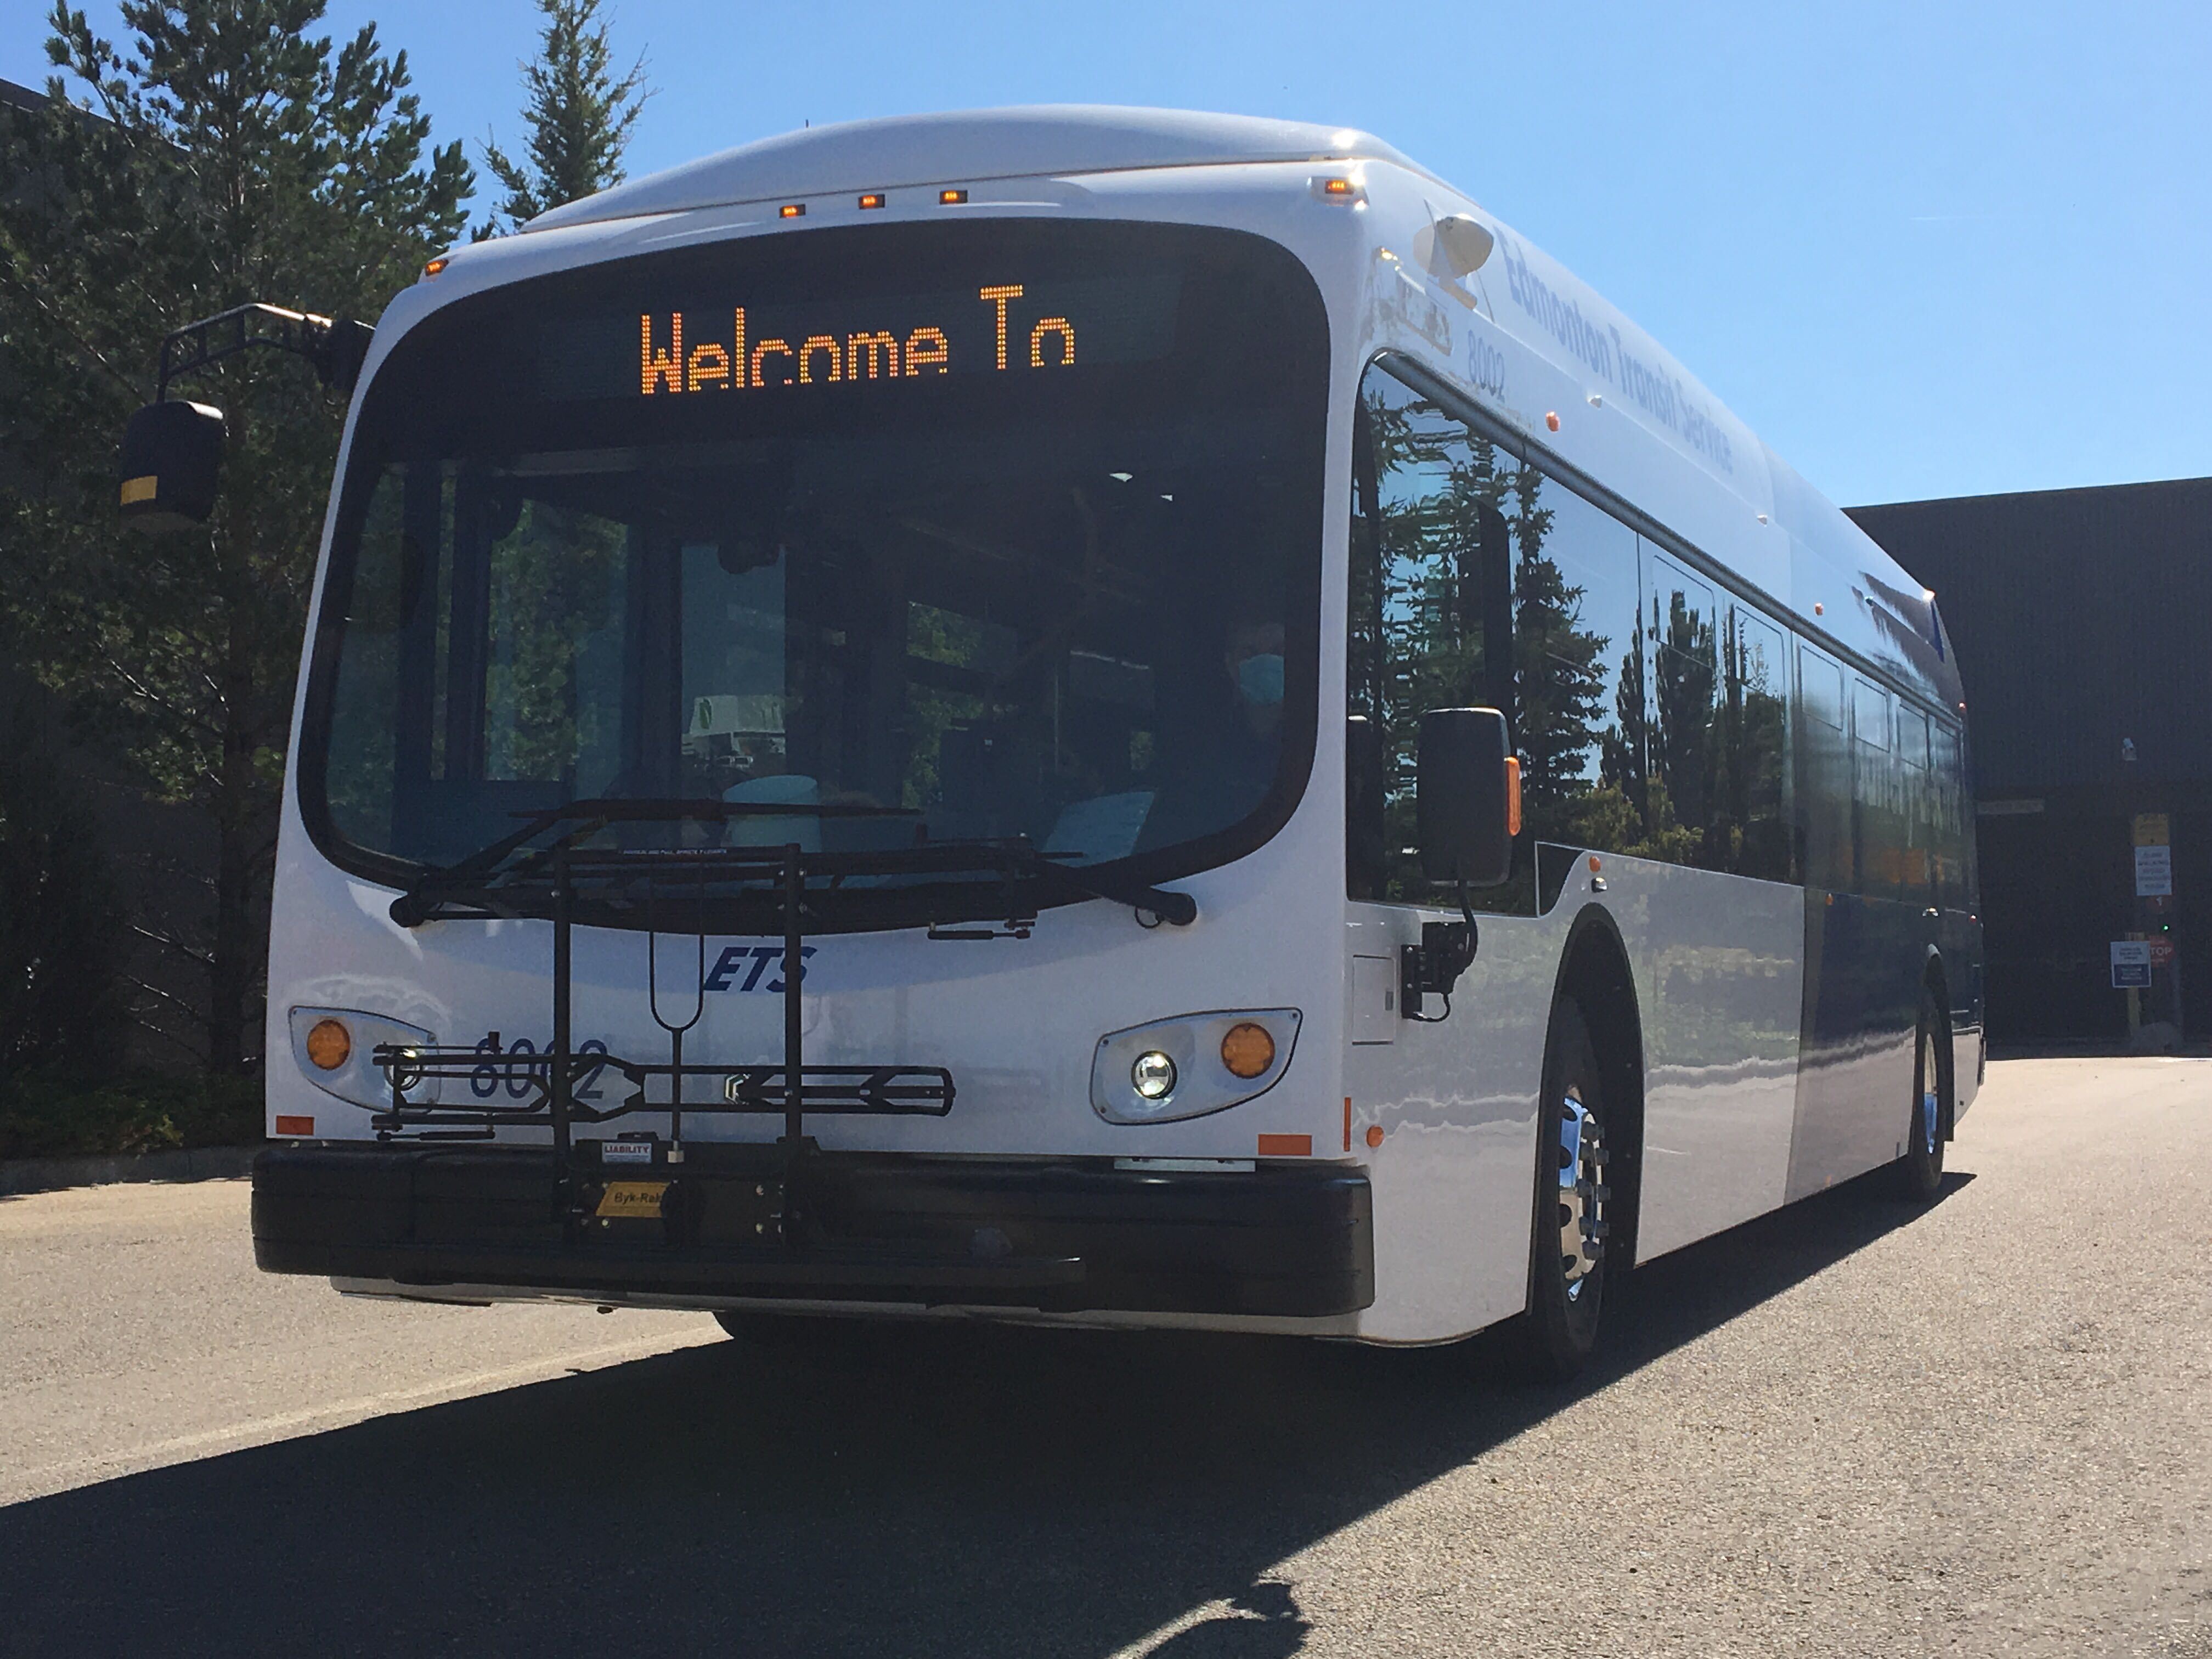 City of Edmonton’s electric bus fleet plagued with issues, over half not in service